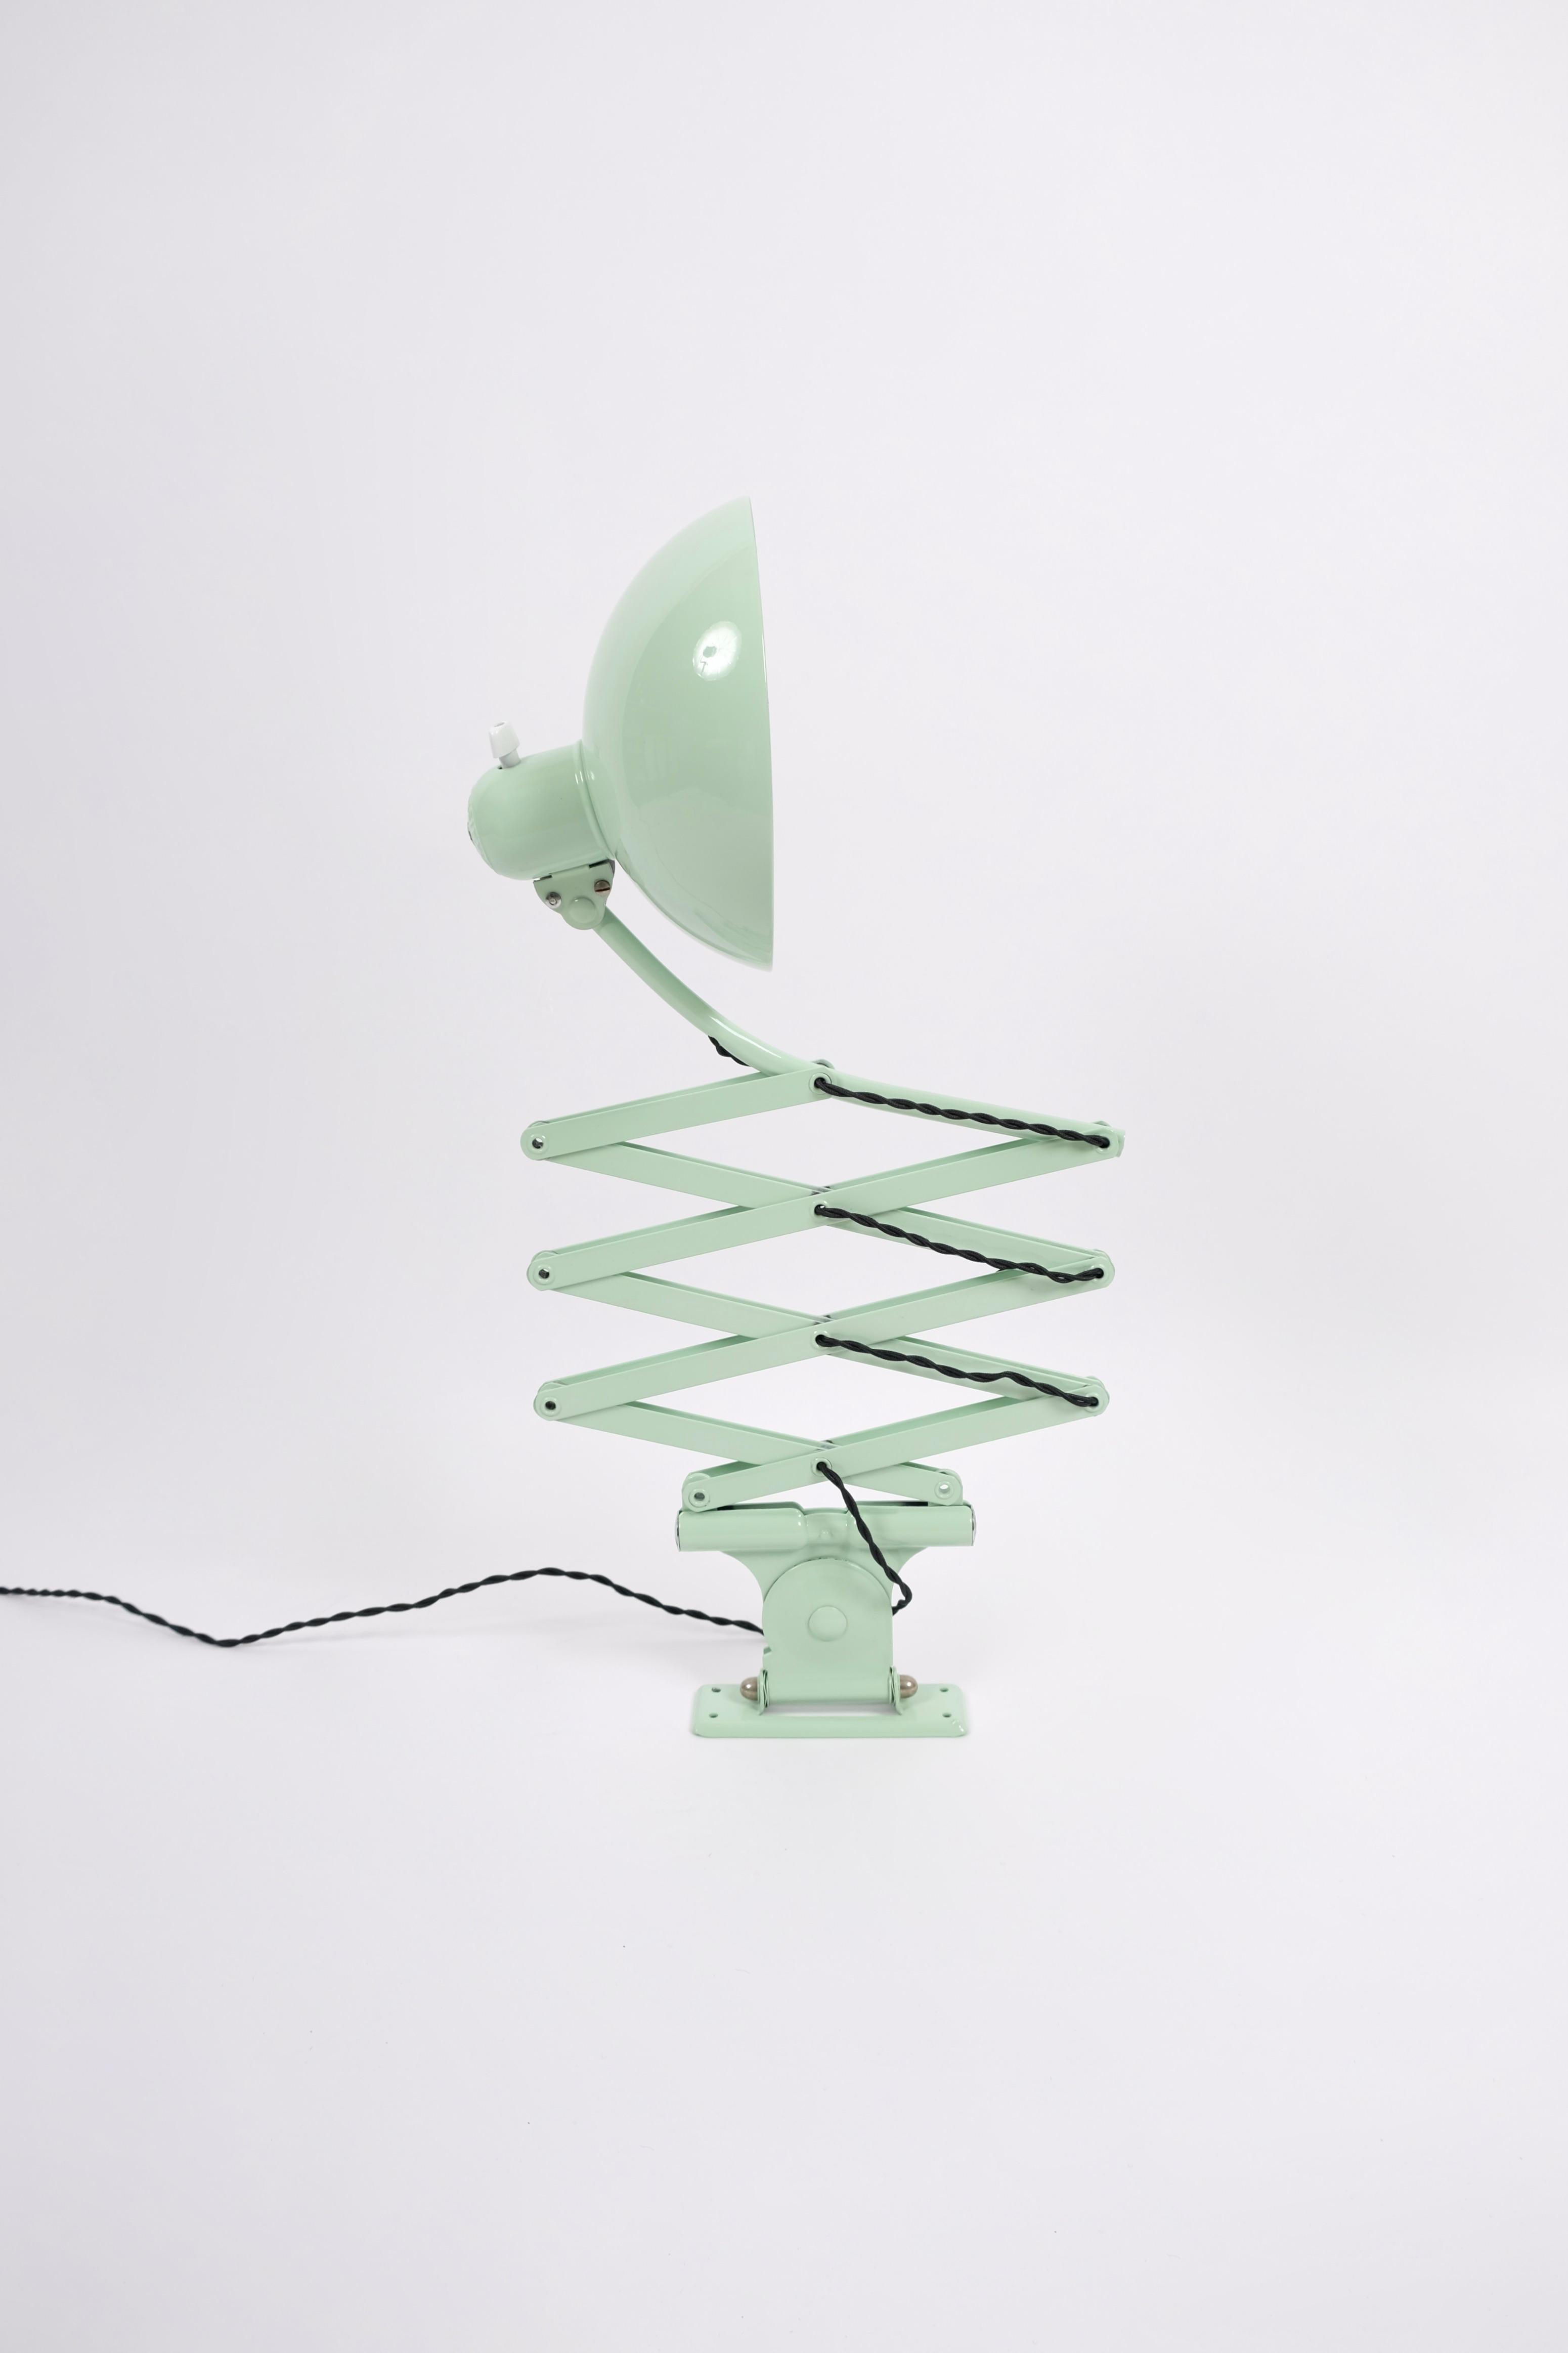 Scissor lamp proffesionally relacquered in pistacio green.
Designed in 1933 by the Bauhaus metal workshop head Christian Dell.
It can move in and out 50-110 cm.
The shade is mounted on a ball joint so that it can be adjusted up and down and side